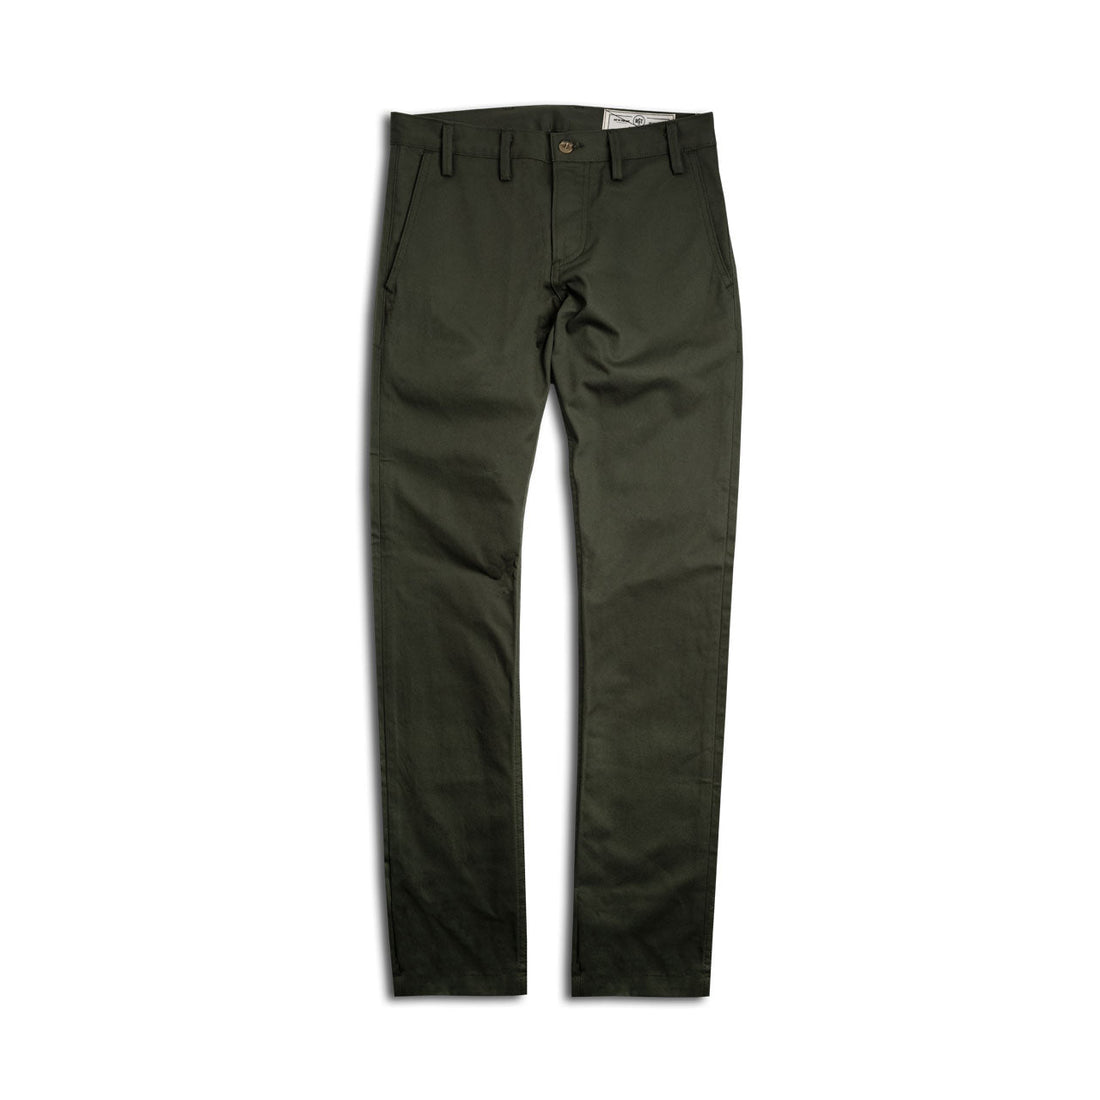 Rogue Territory Officer Trouser | Uncrate Supply